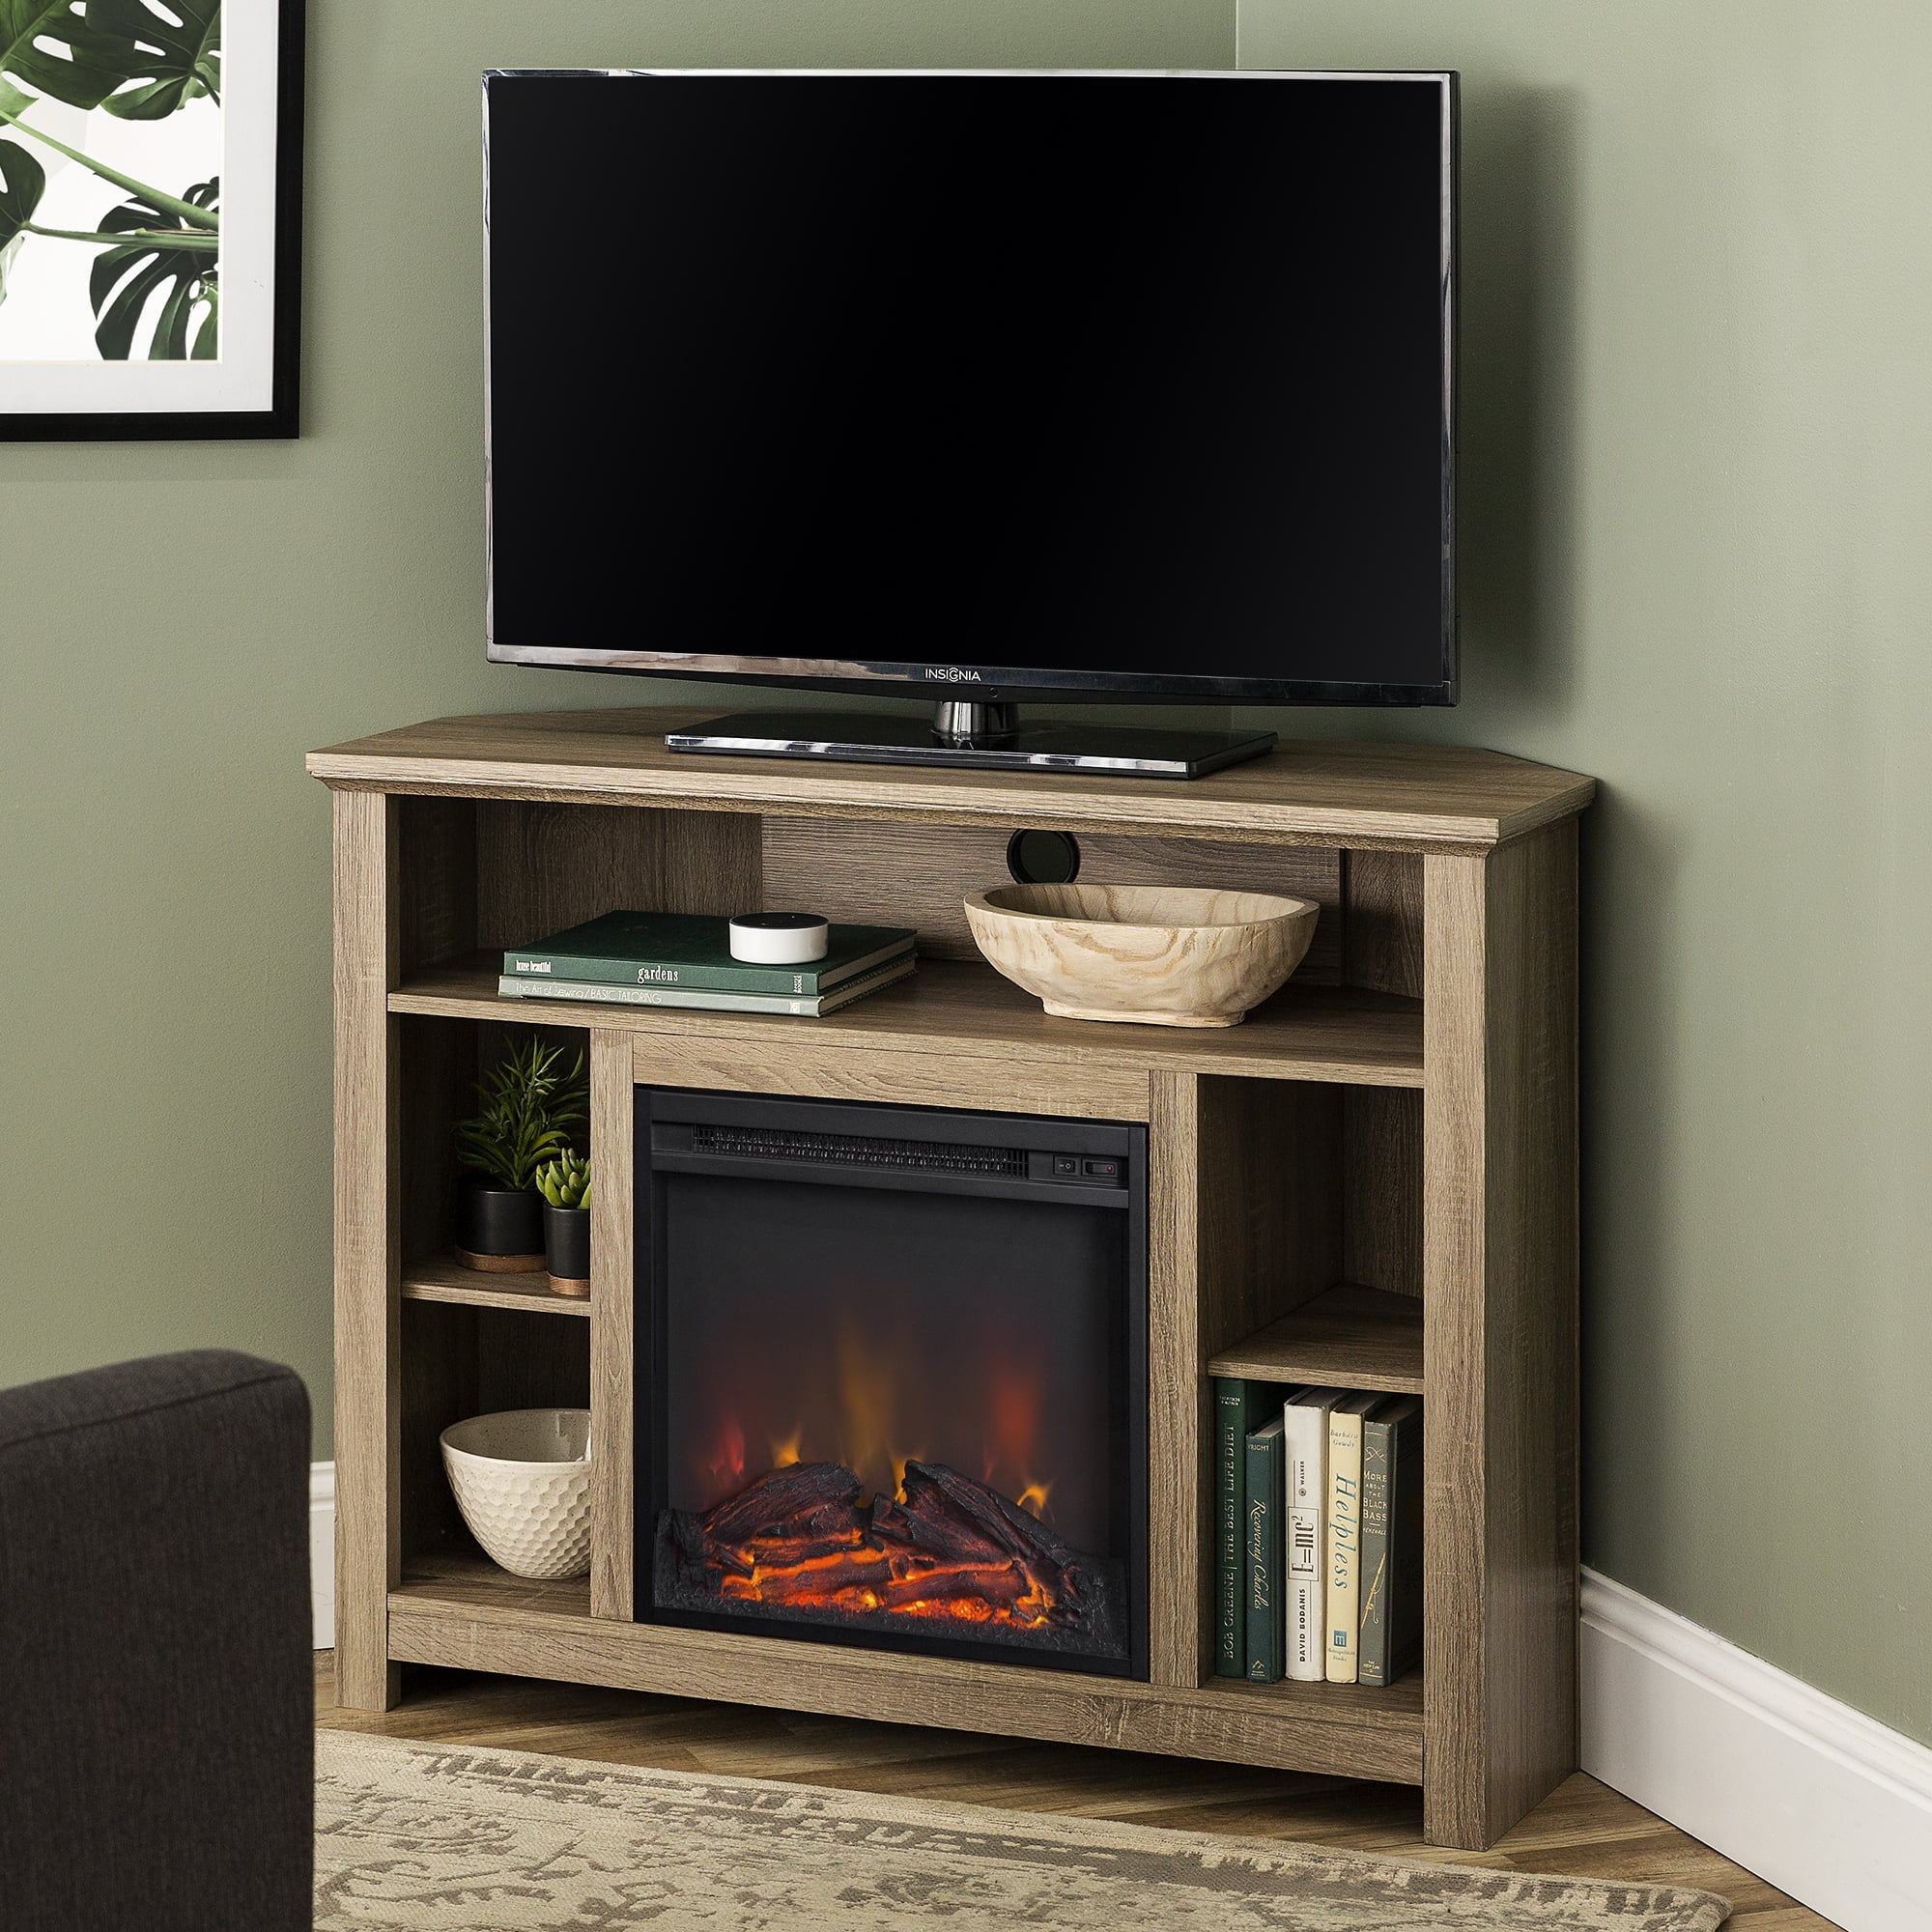 Manor Park Tall Corner Fireplace Tv, Corner Tv Stand With Built In Surround Sound And Fireplace